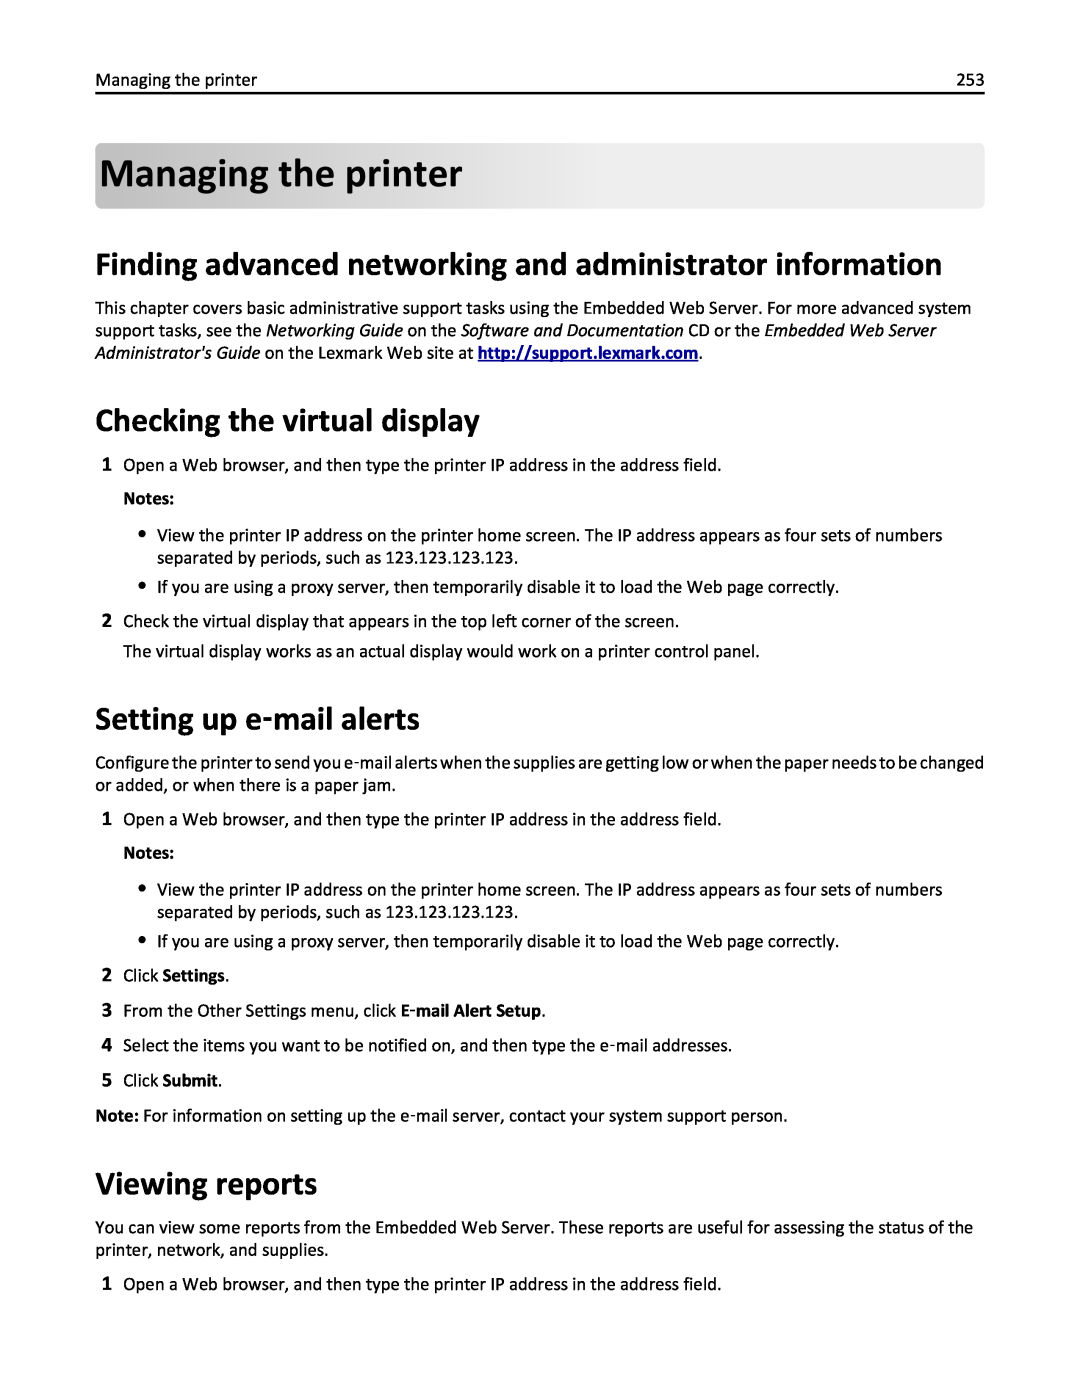 Lexmark 237 Managing the printer, Finding advanced networking and administrator information, Checking the virtual display 